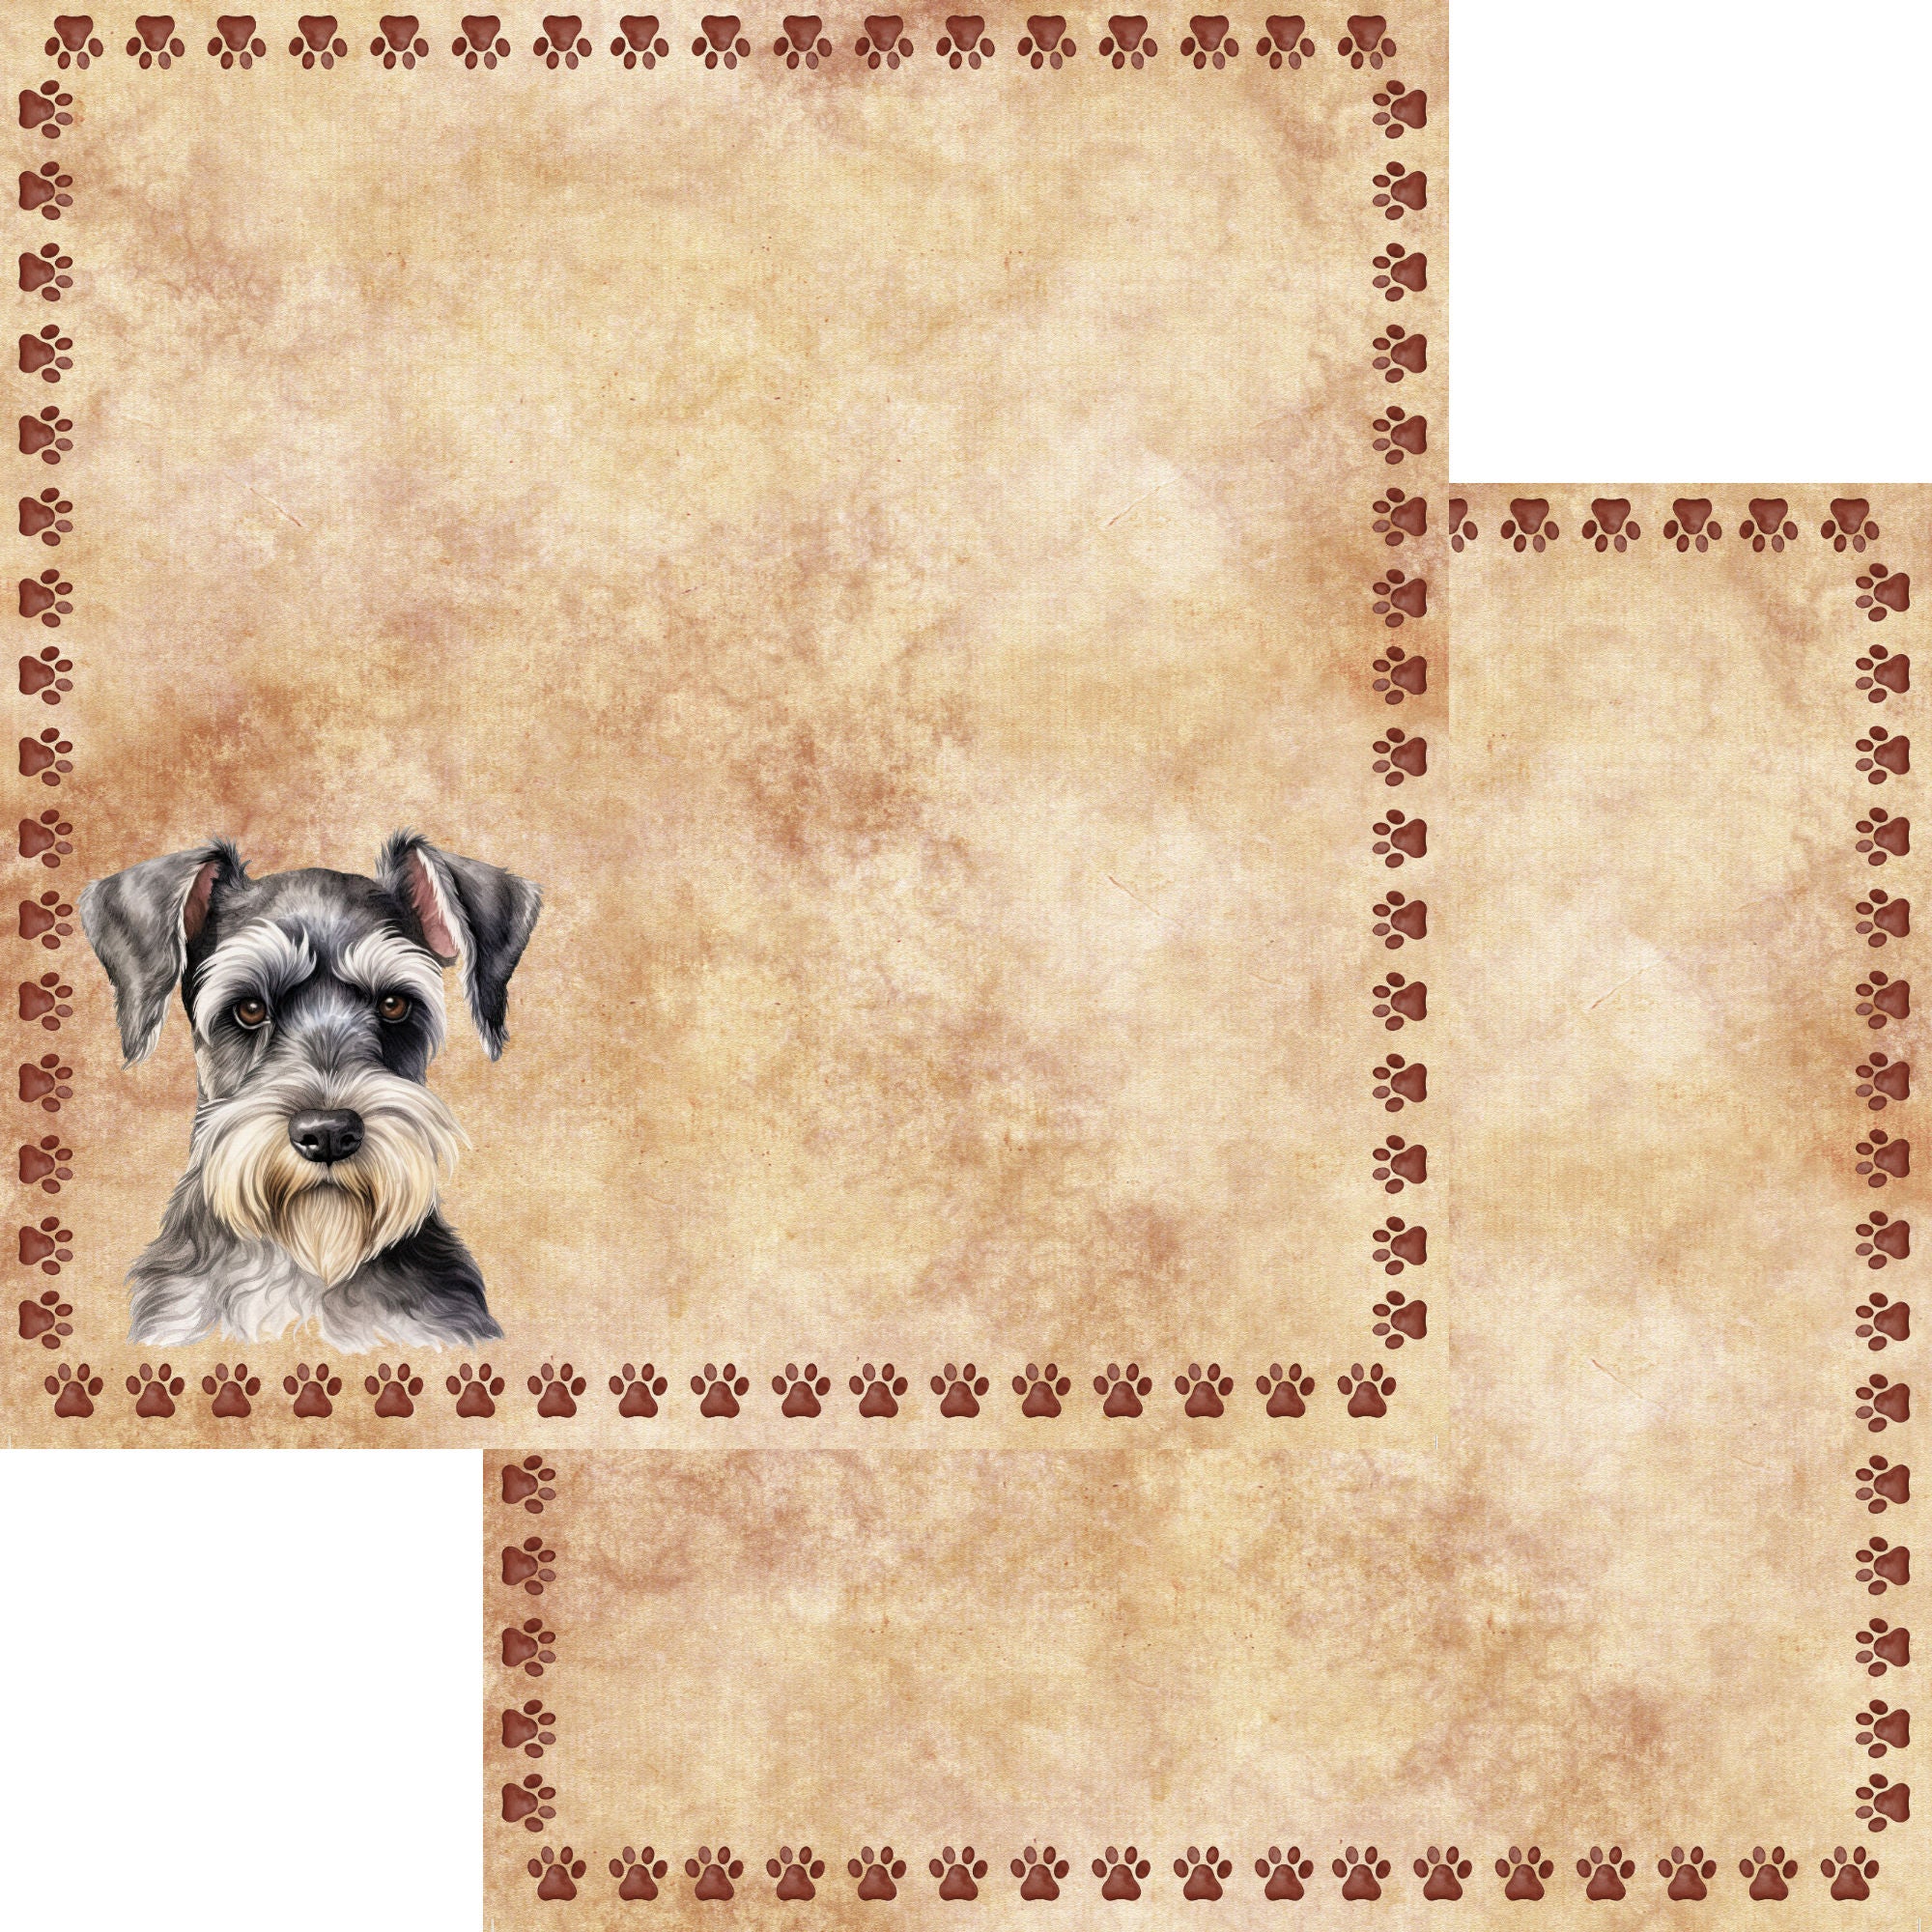 Dog Breeds Collection Miniature Schnauzer 12 x 12 Double-Sided Scrapbook Paper by SSC Designs